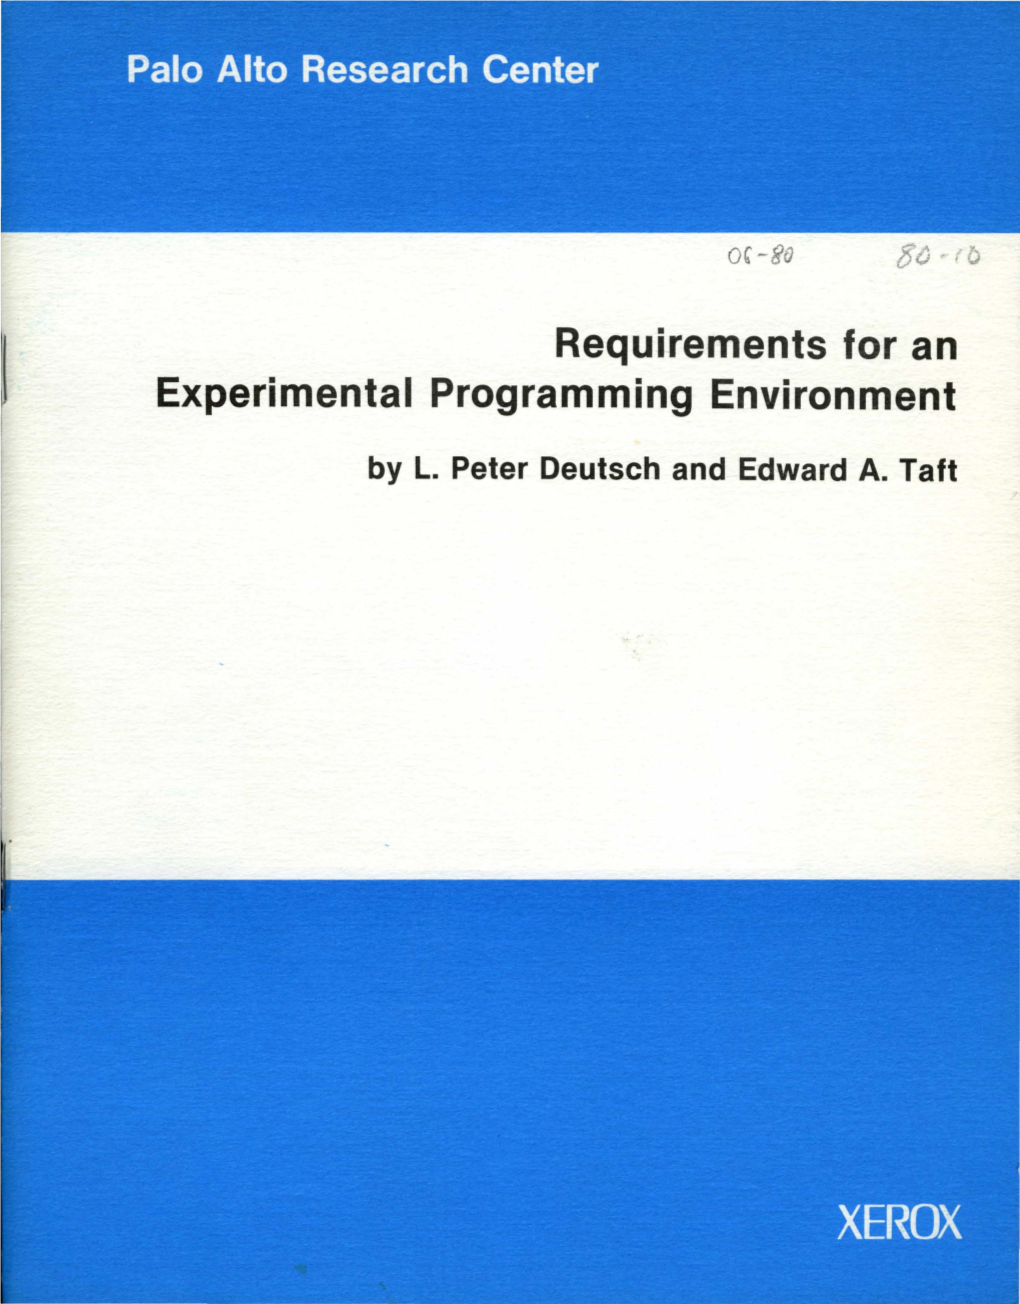 Requirements for an Experimental Programming Environment